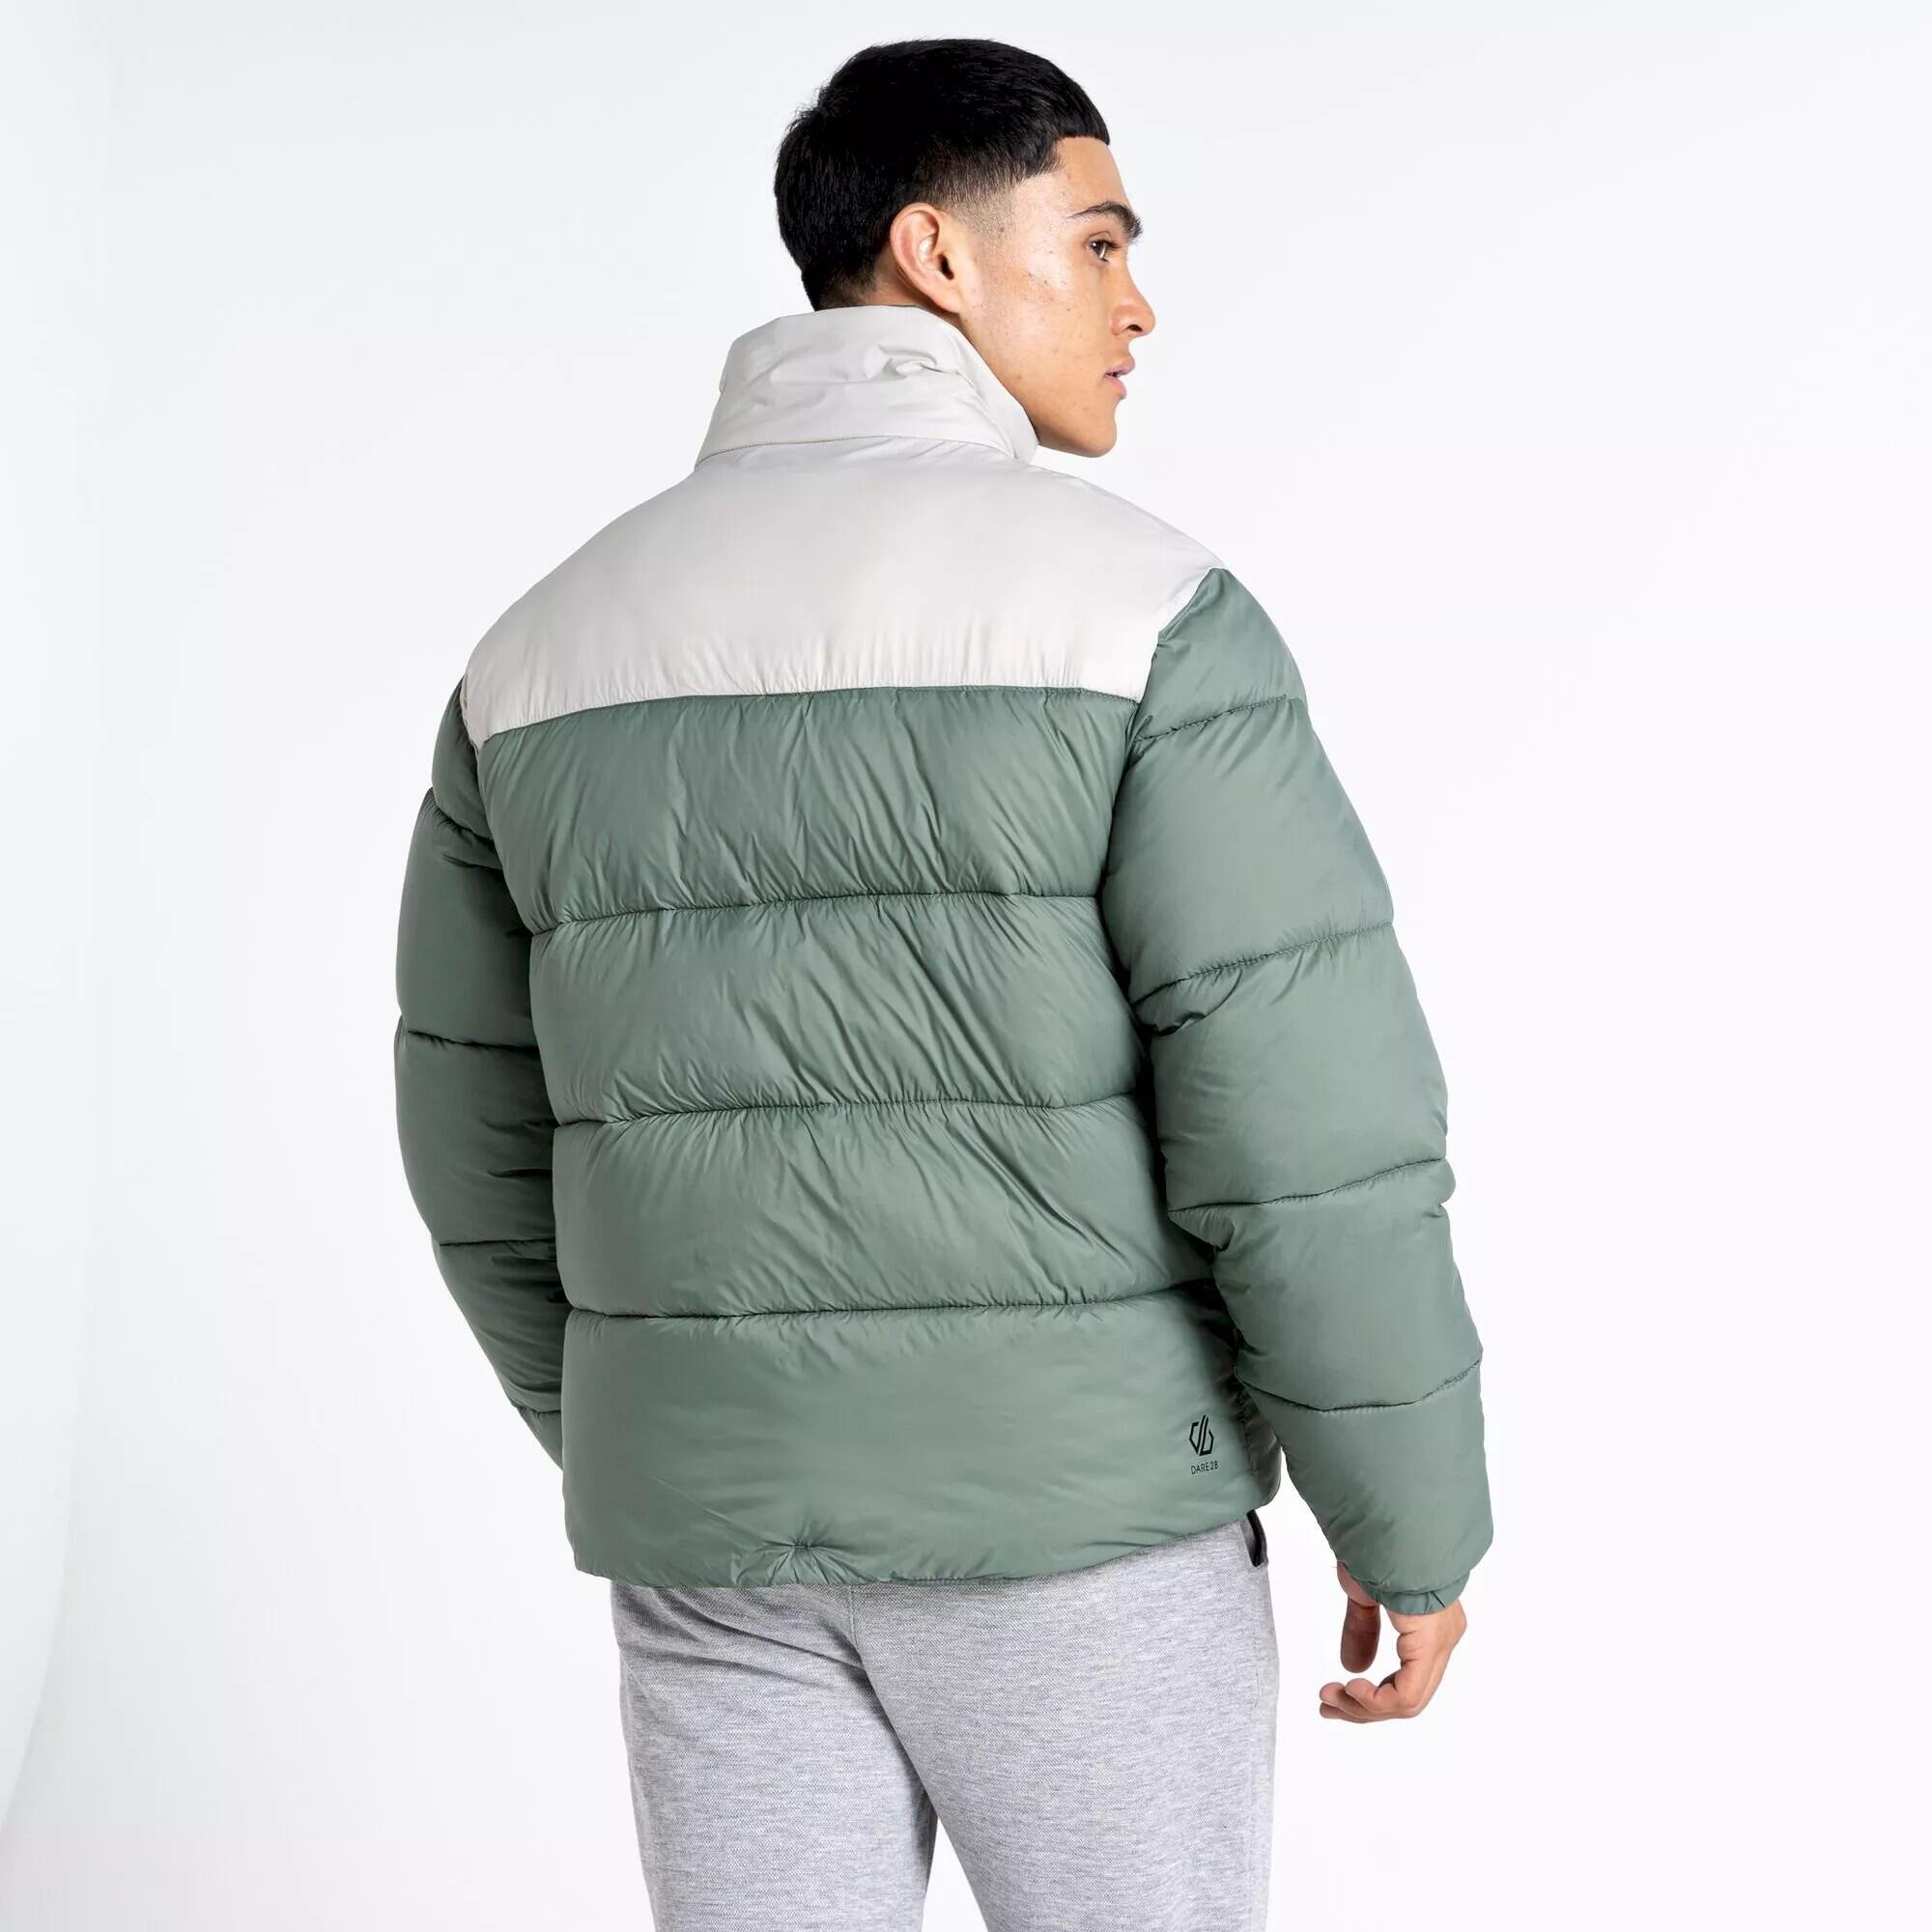 Mens The Jermaine Jenas Edit Mentor Padded Jacket (Duck Green/Willow Grey) 2/5